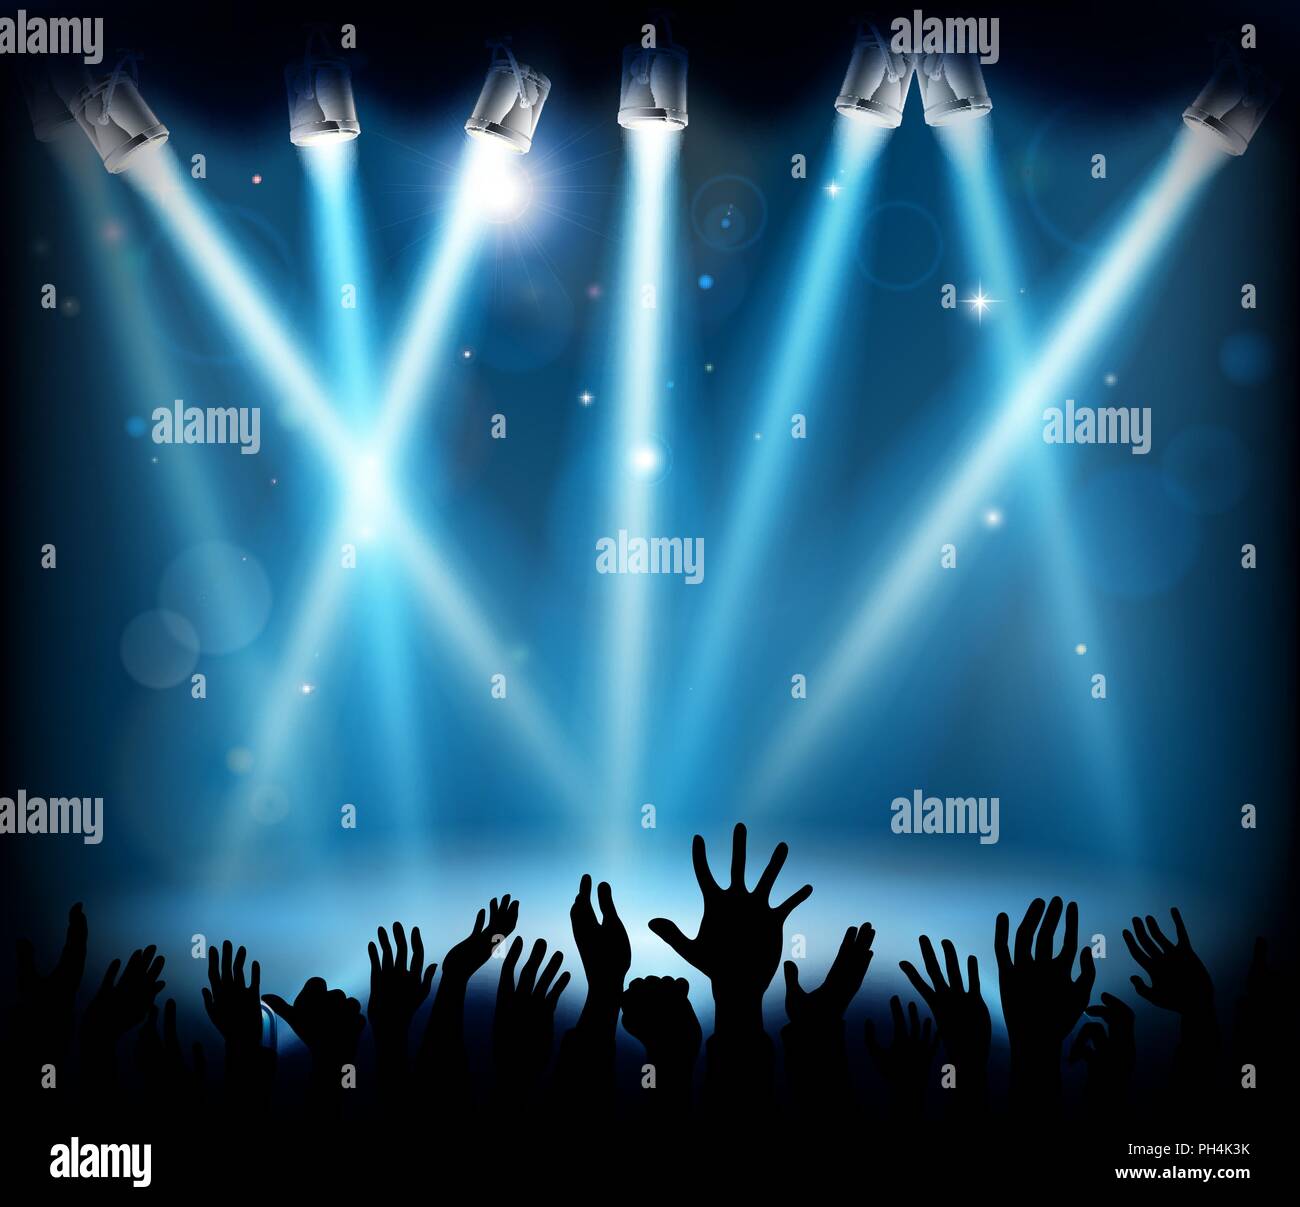 Stage Party Crowd Concert People Hands Silhouette Stock Vector